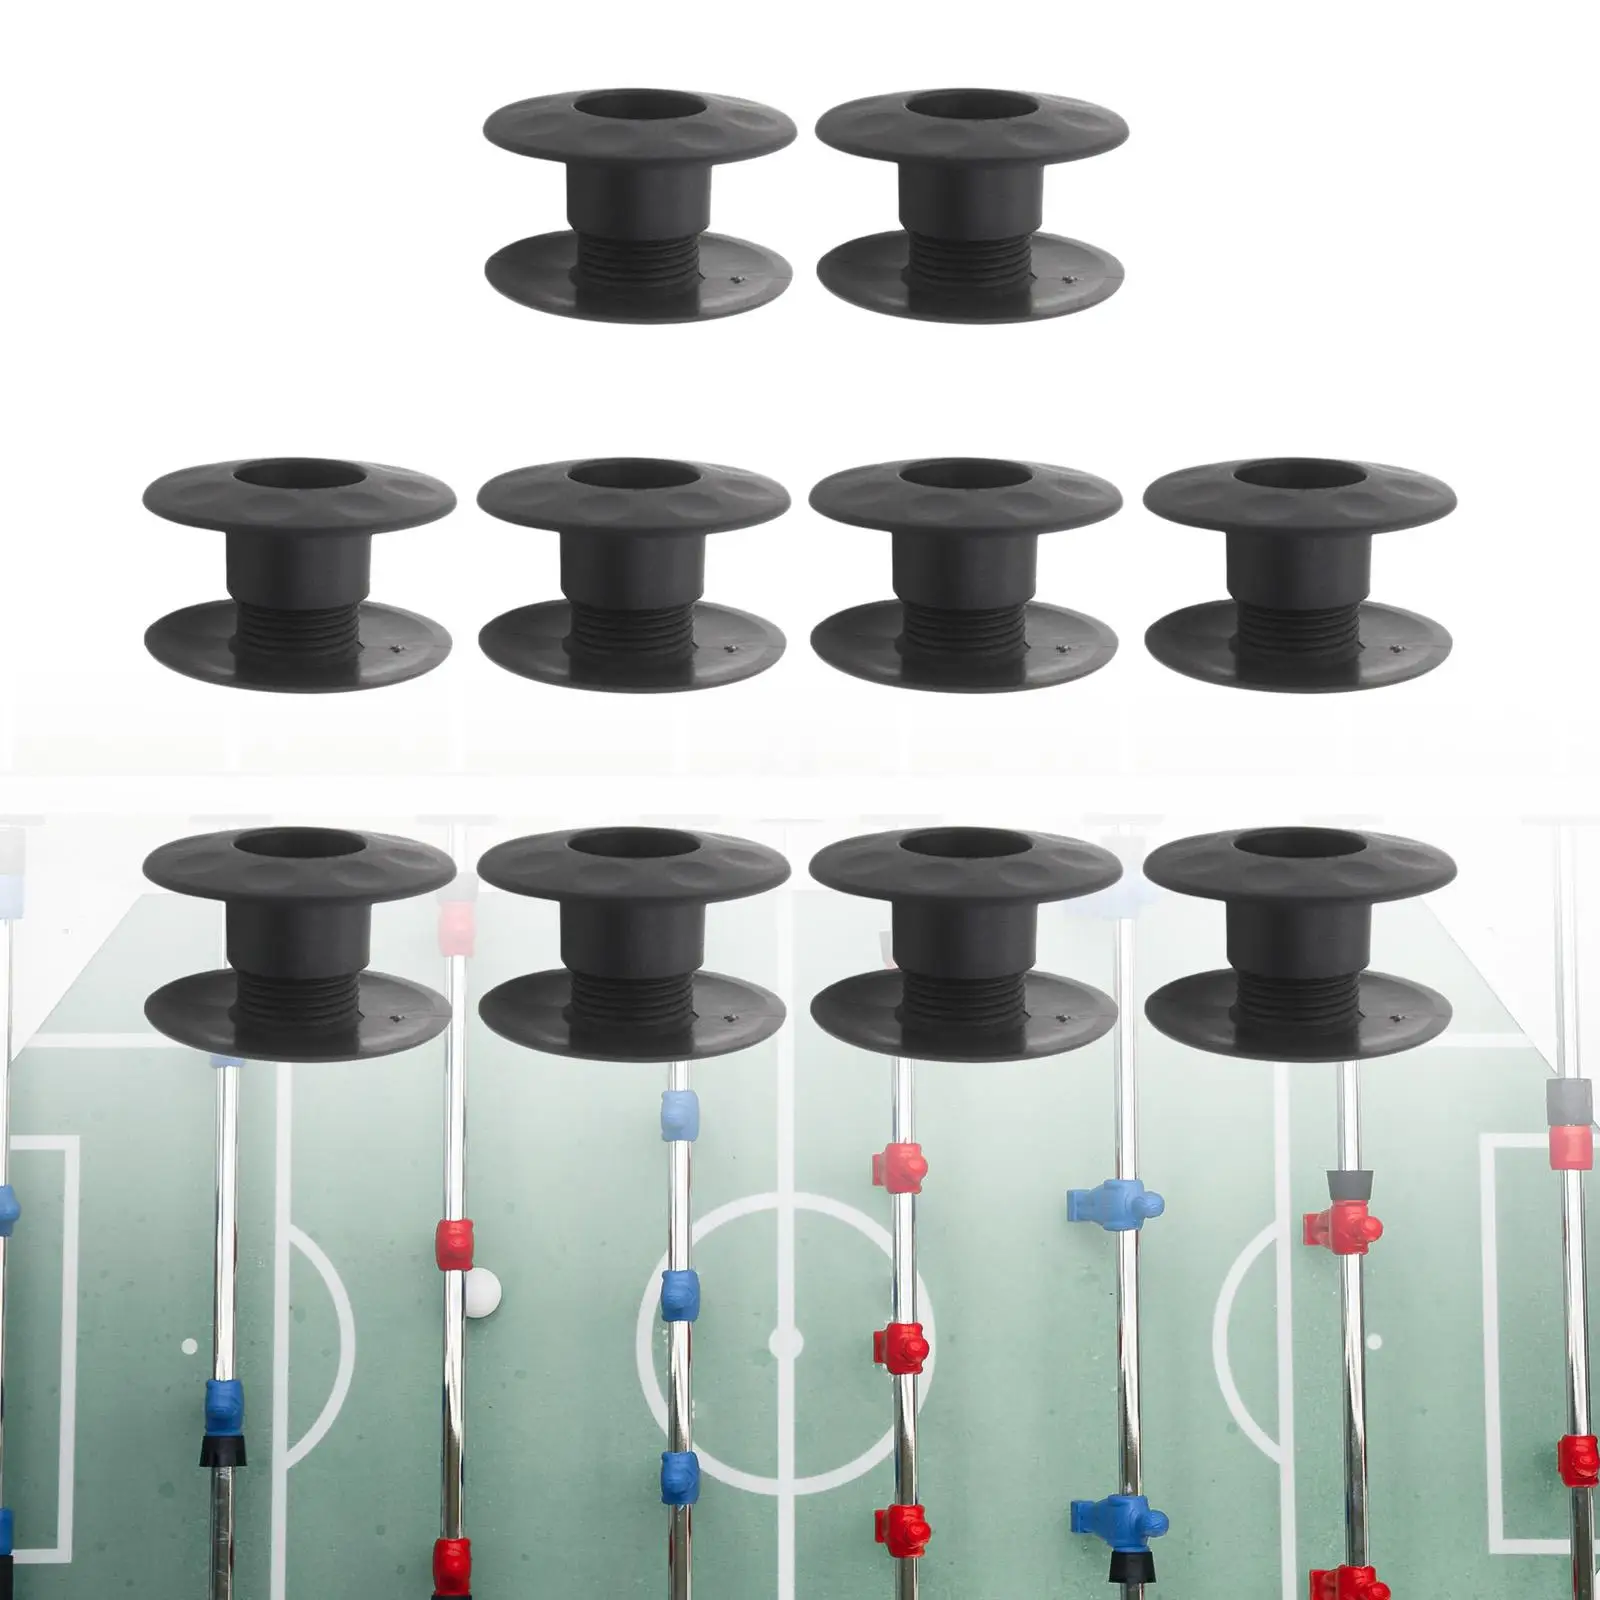 10 Sets Foosball Bearing Rods Replacement Parts, Table Foosball Bushings Accessories Parts